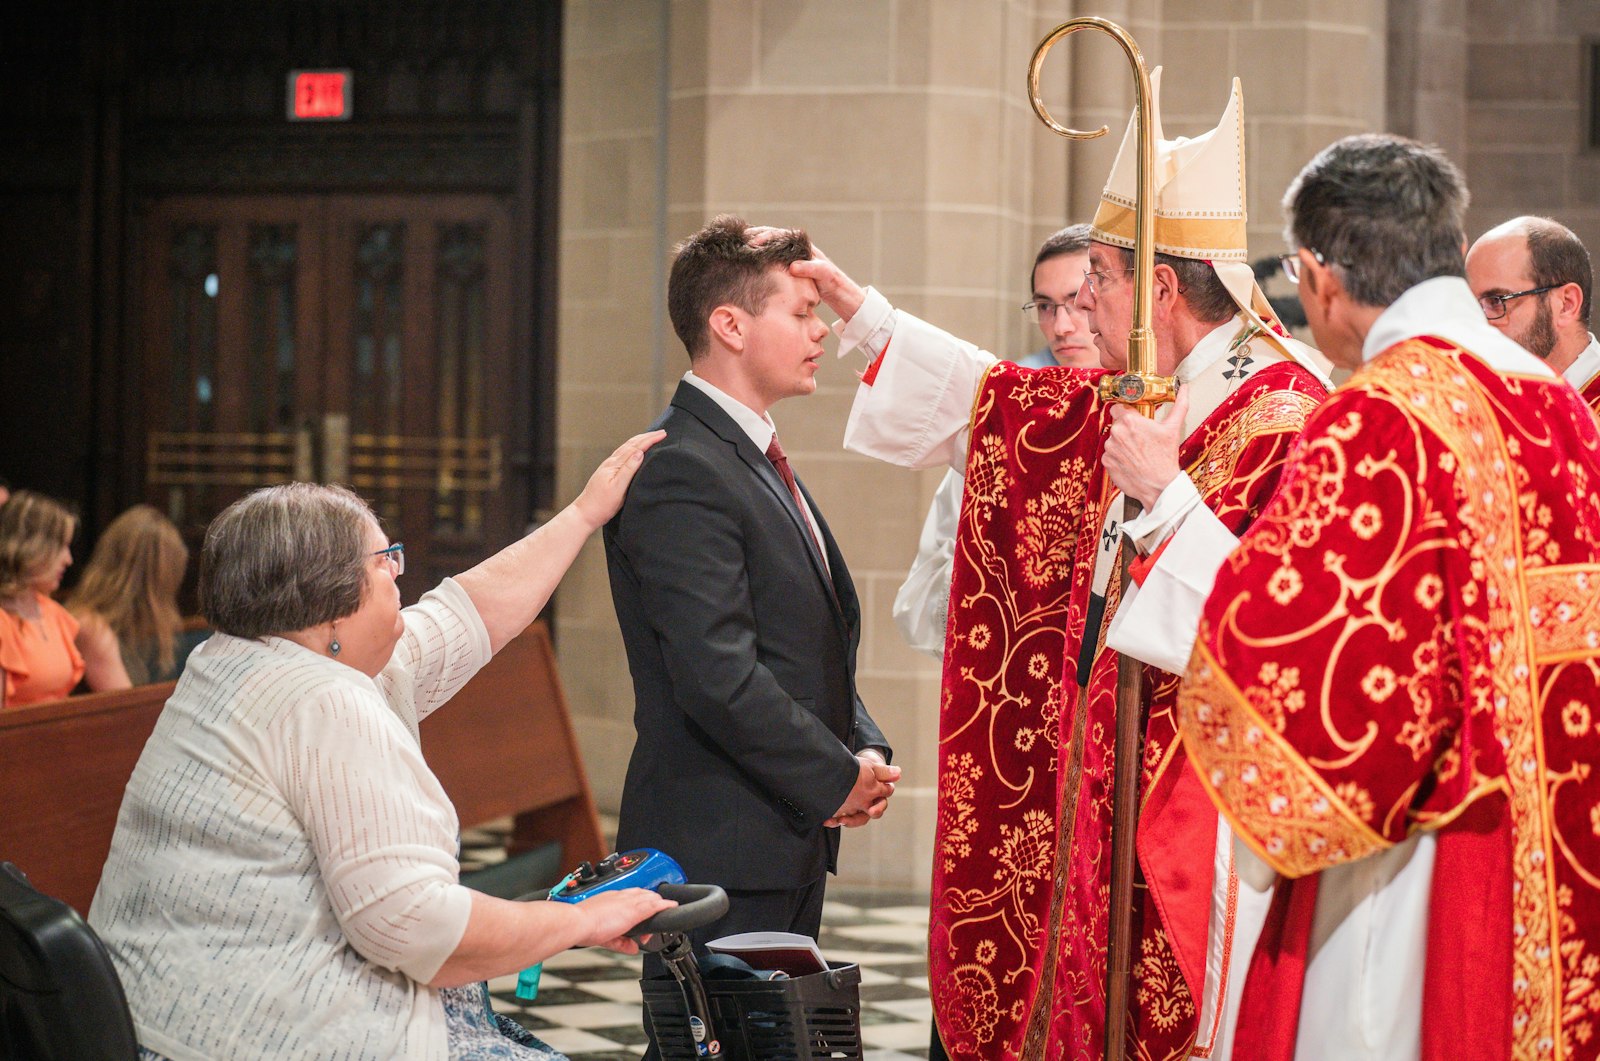 Archbishop Vigneron confirms a young man during a Pentecost Sunday Mass at the Cathedral of the Most Blessed Sacrament. The archbishop asked for prayers from the faithful as the archdiocese seeks to continue to obediently carry out this mission, particularly for the Missionary Renewal Assembly, which will take place at the end of June.